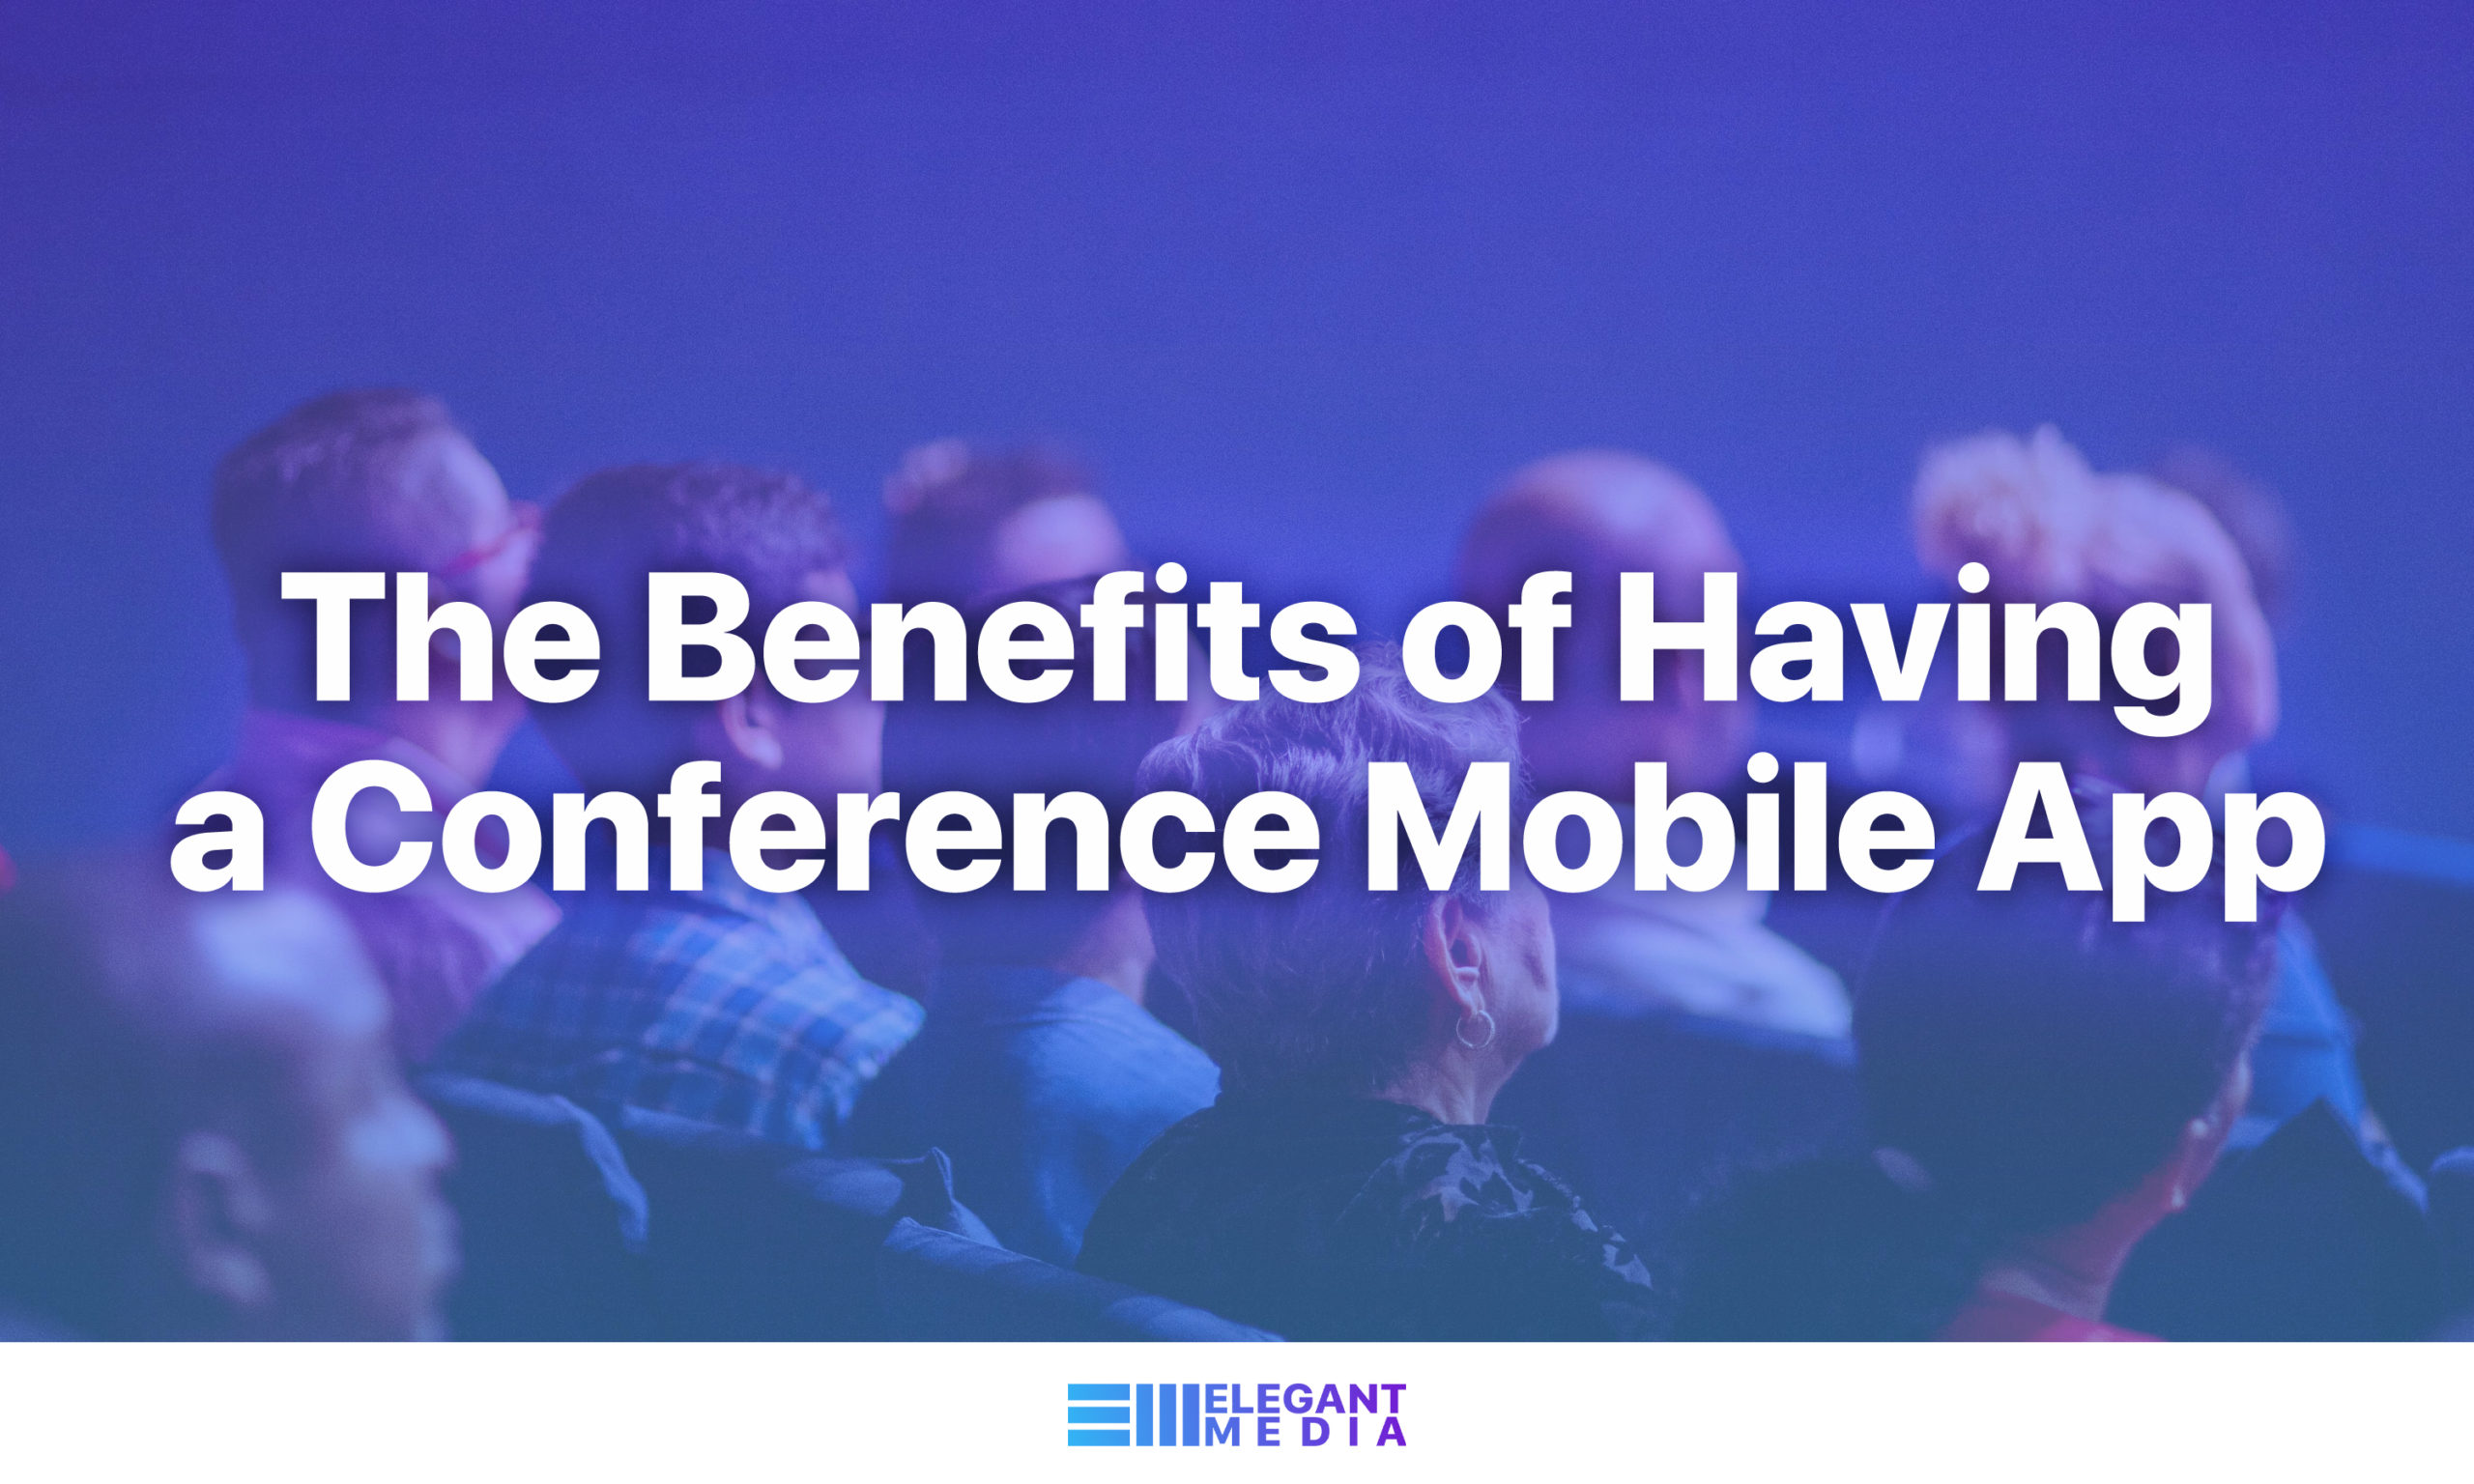 The Benefits of Having a Conference Mobile App